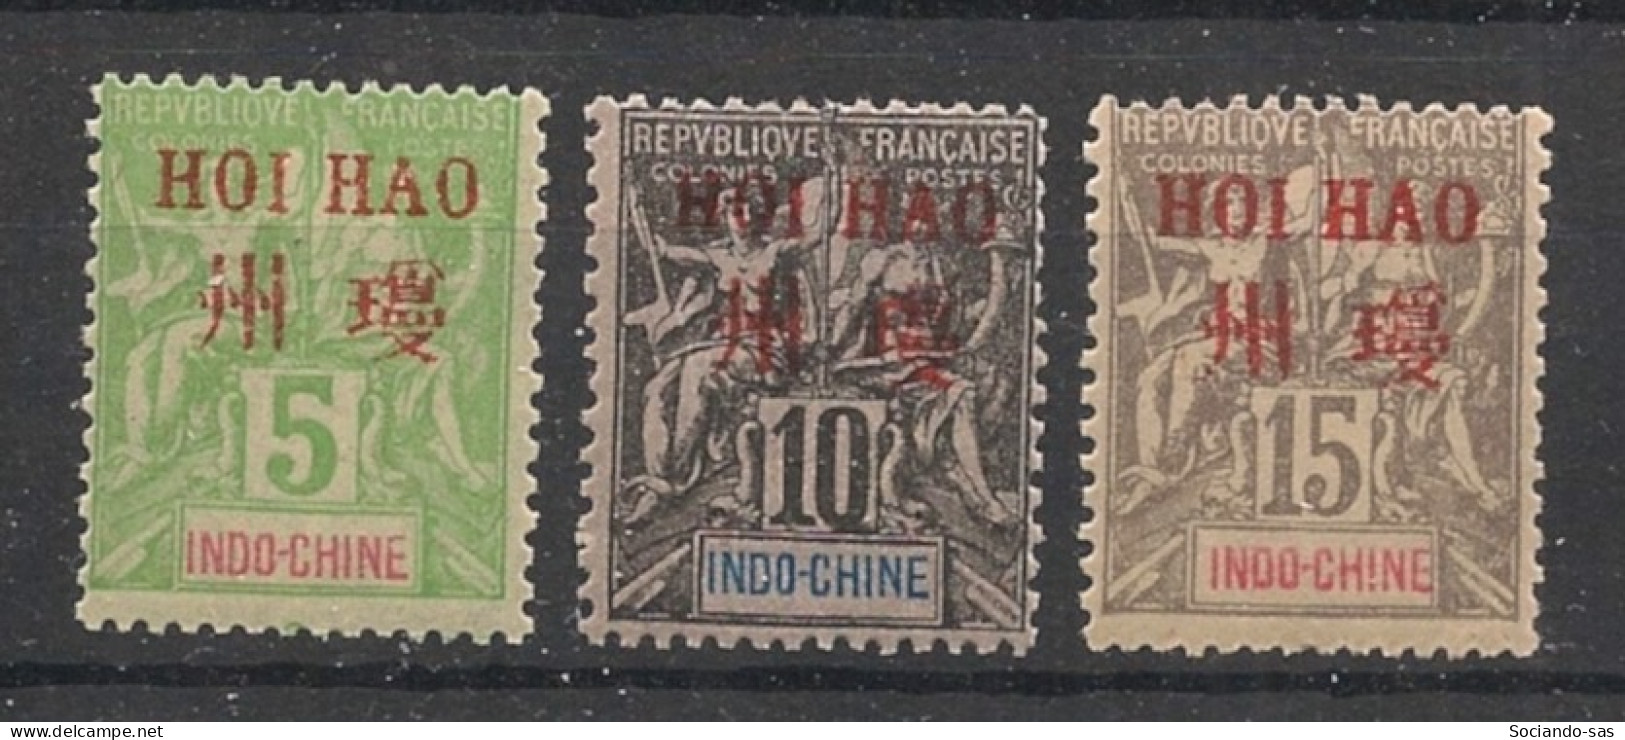 HOI-HAO - 1901 - N°YT. 4 à 6 - Type Groupe 5c Vert à 15c Gris - Neuf Luxe ** / MNH / Postfrisch - Unused Stamps